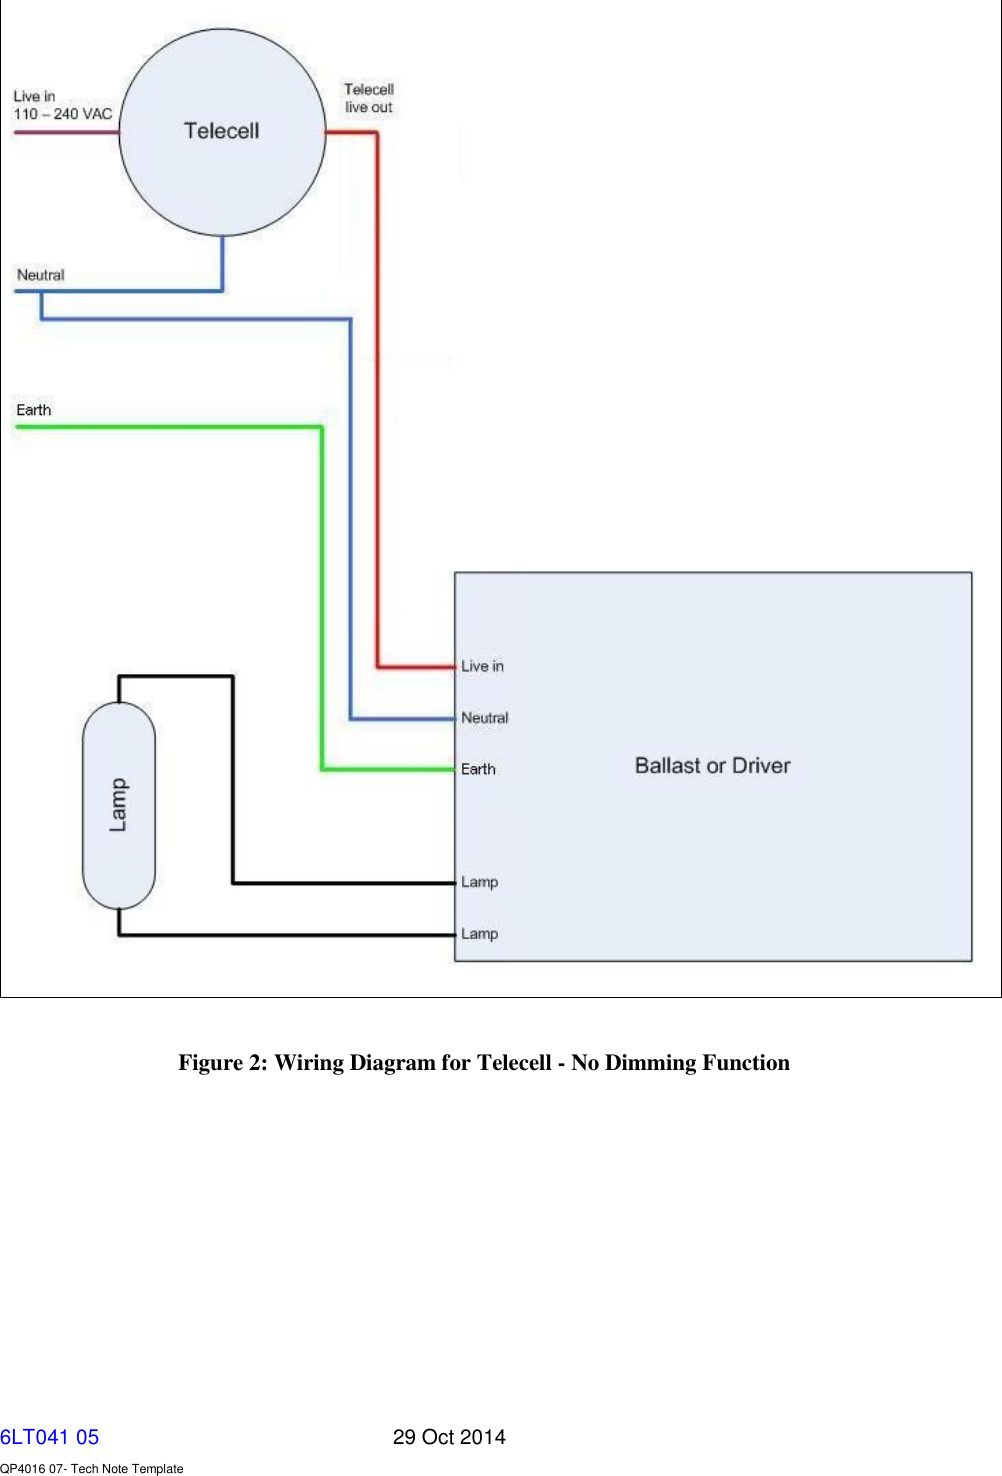   6LT041 05       29 Oct 2014    QP4016 07- Tech Note Template   Figure 2: Wiring Diagram for Telecell - No Dimming Function   